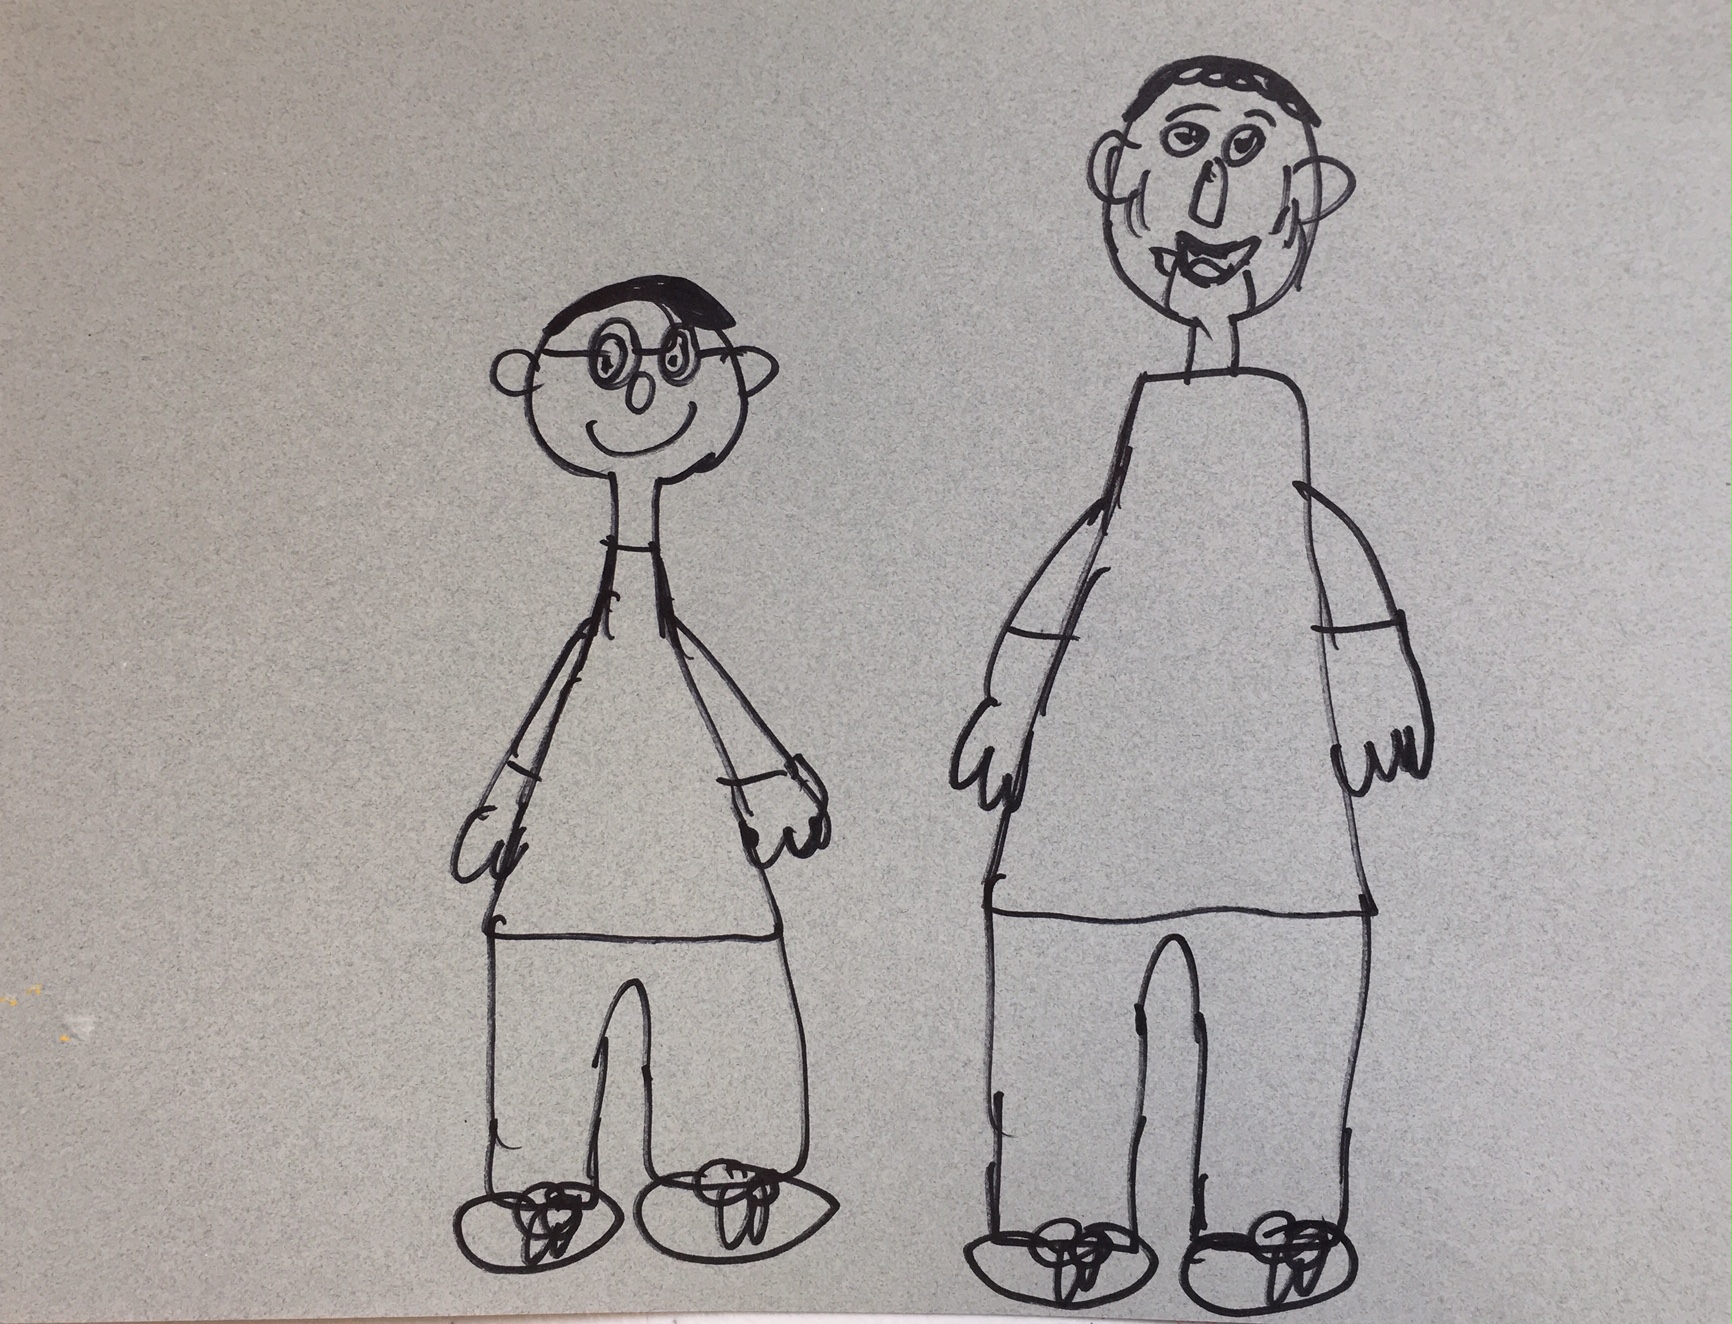 A drawing of a father and son